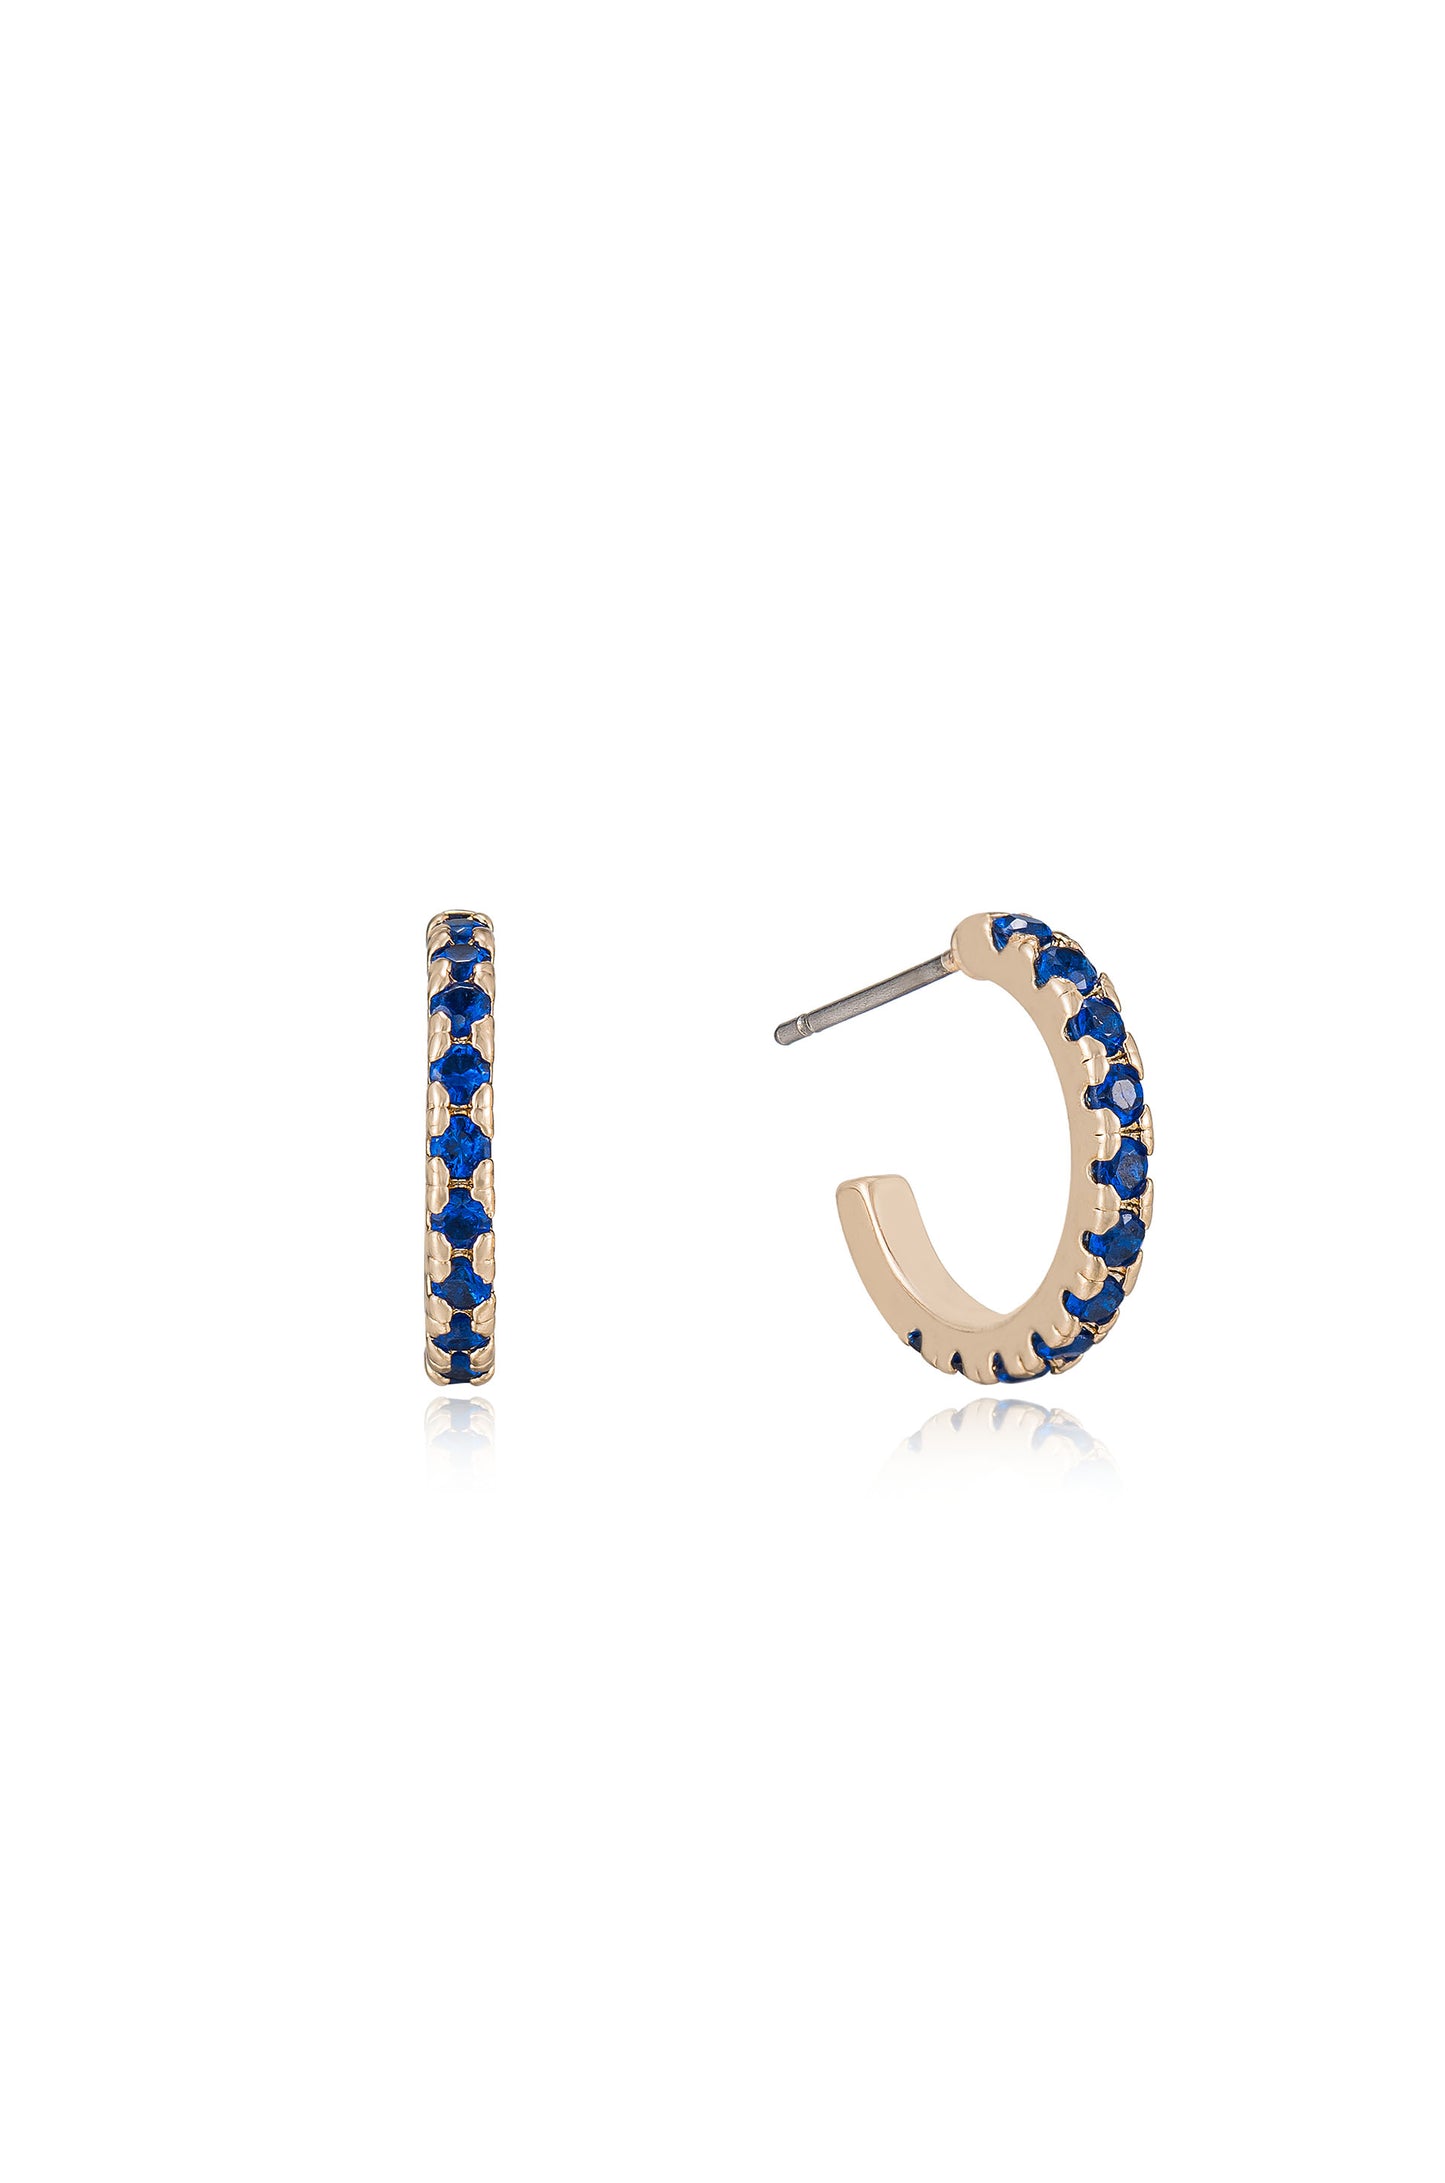 Colorful Crystal 18k Gold Plated Huggie Earrings in sapphire